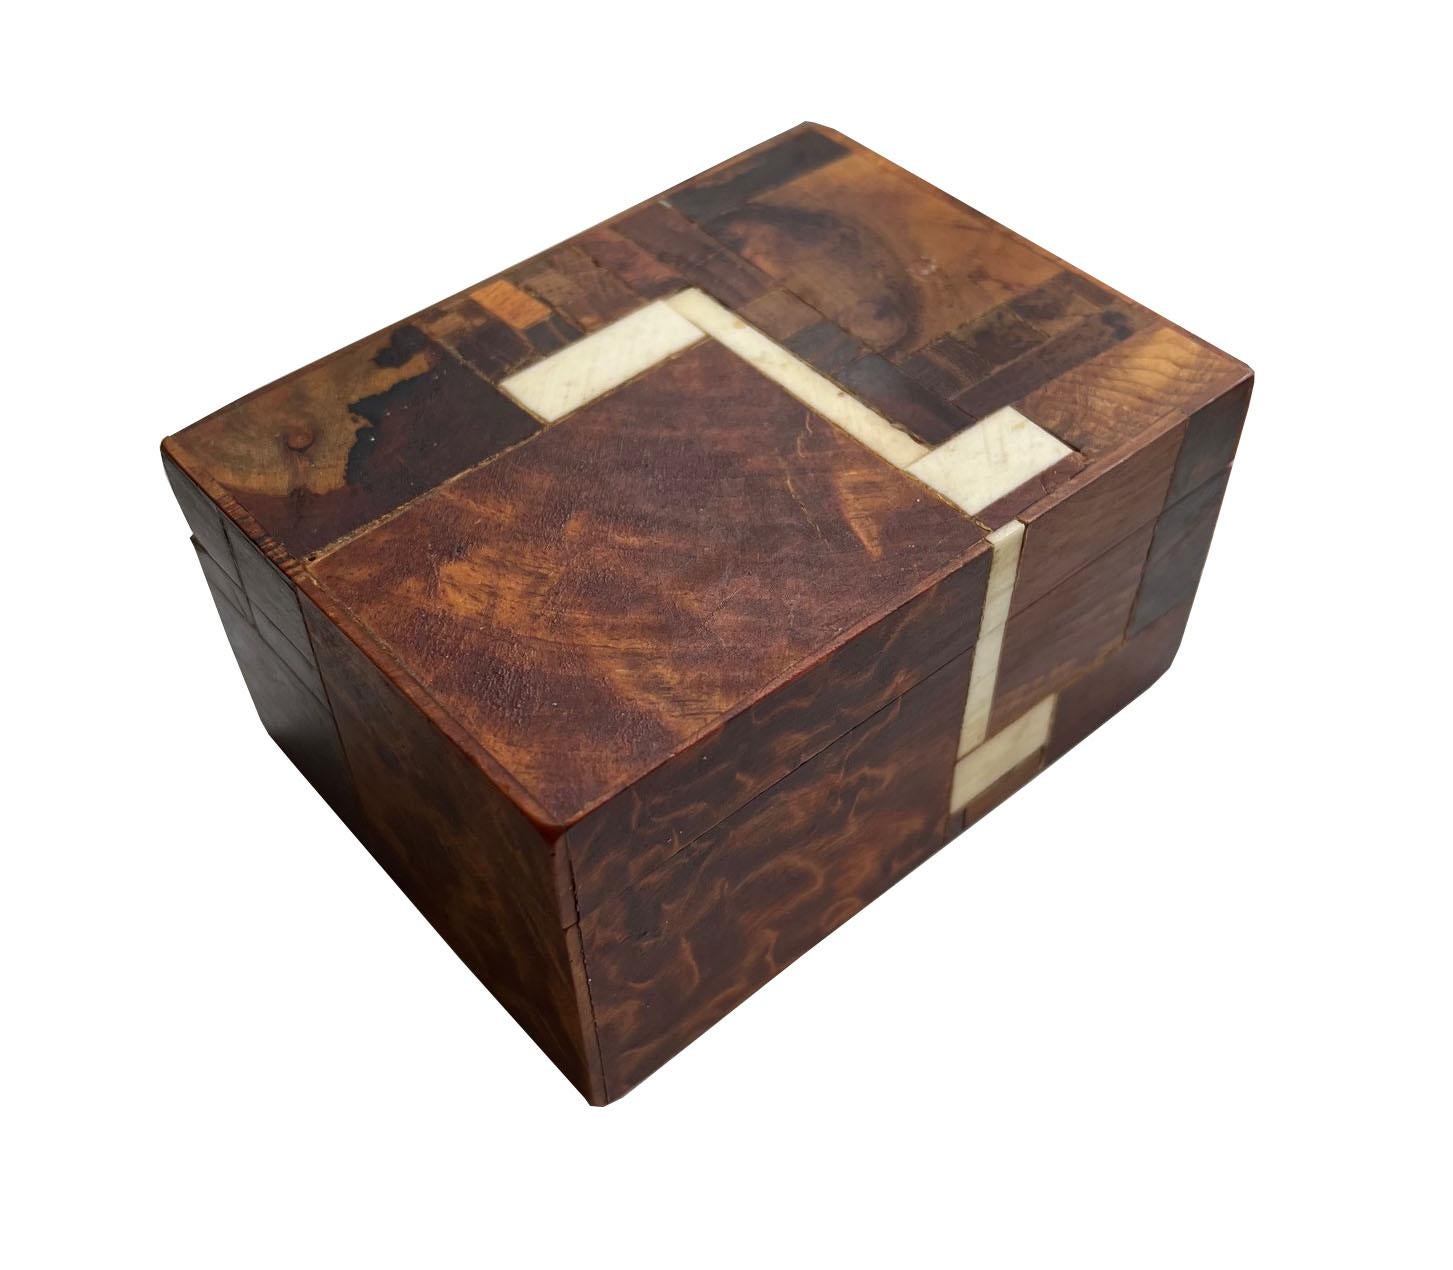 Brumm Handcrafted Wood Wood box with velvet interior.

This beautiful handmade inlaid wood decorative box by artist Norman Brumm (1939 - 2008) is an intricate work of art. Made up of pieces of wood of various sizes and species that reveal the grain